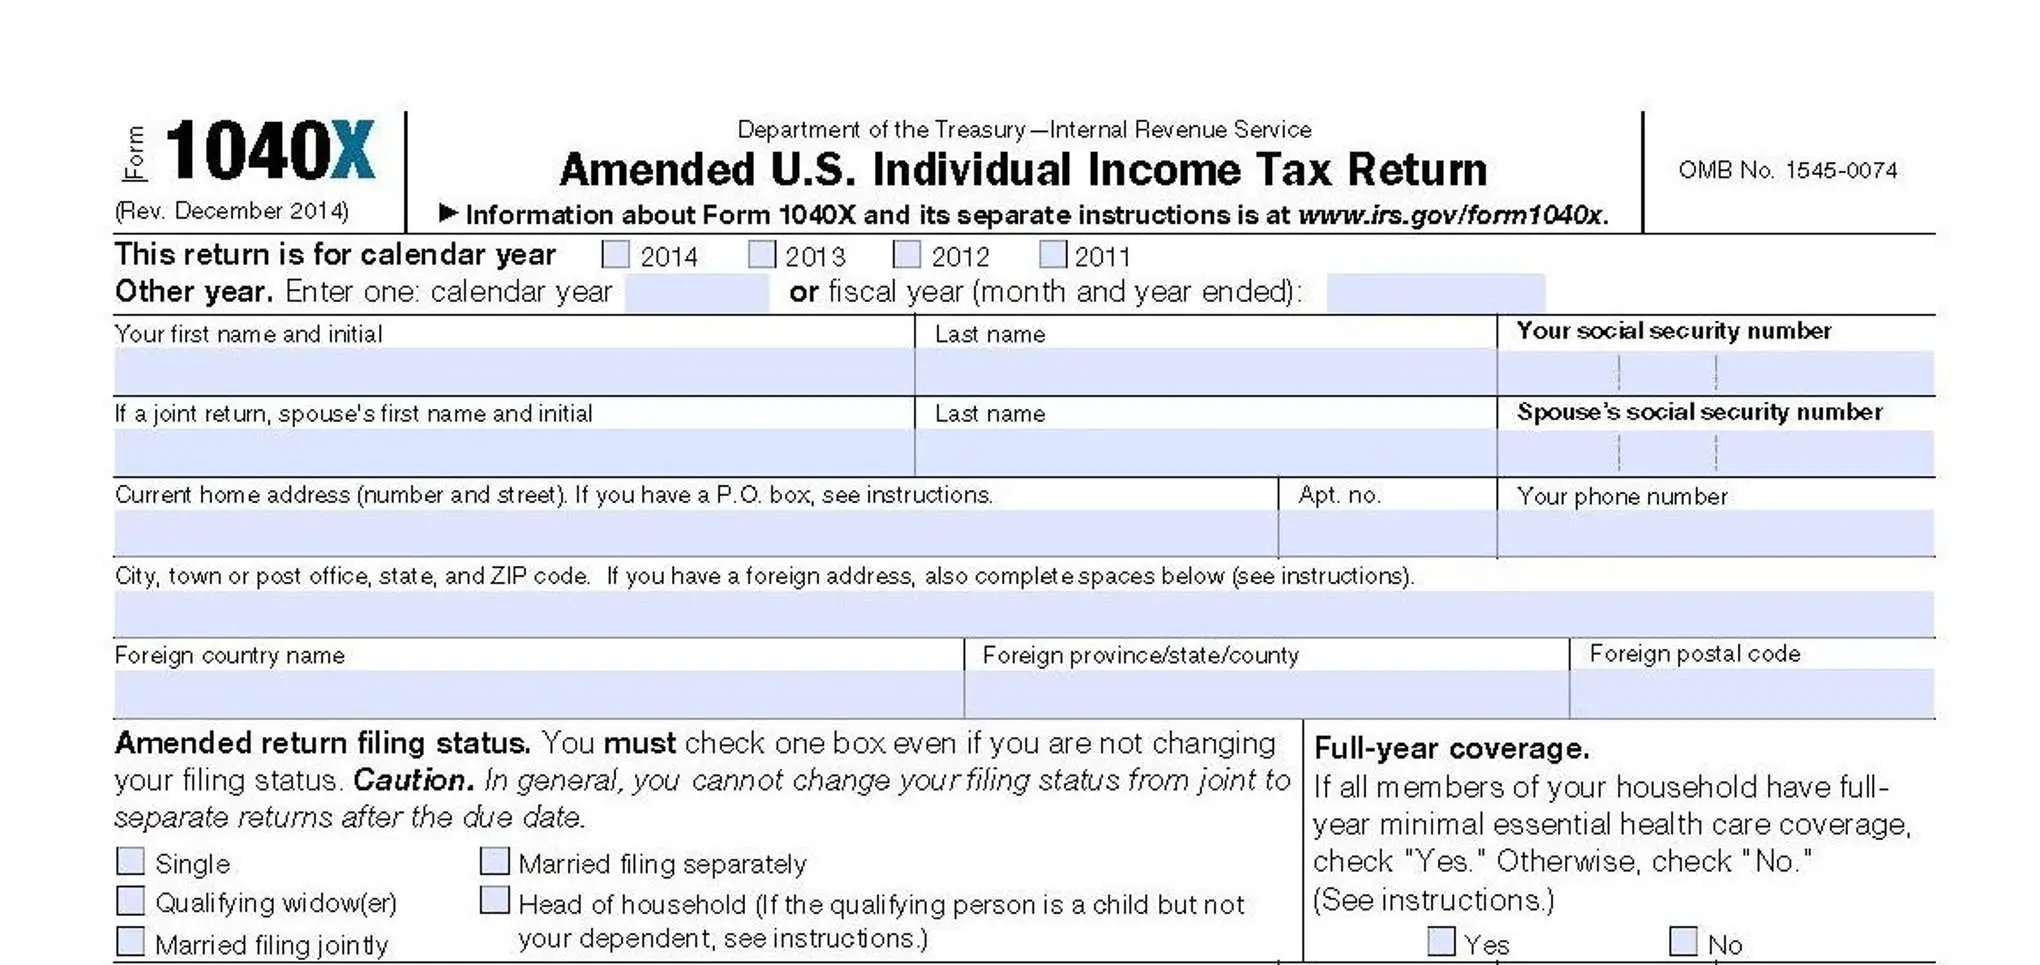 Correcting Mistakes After You File: Amended Tax Returns